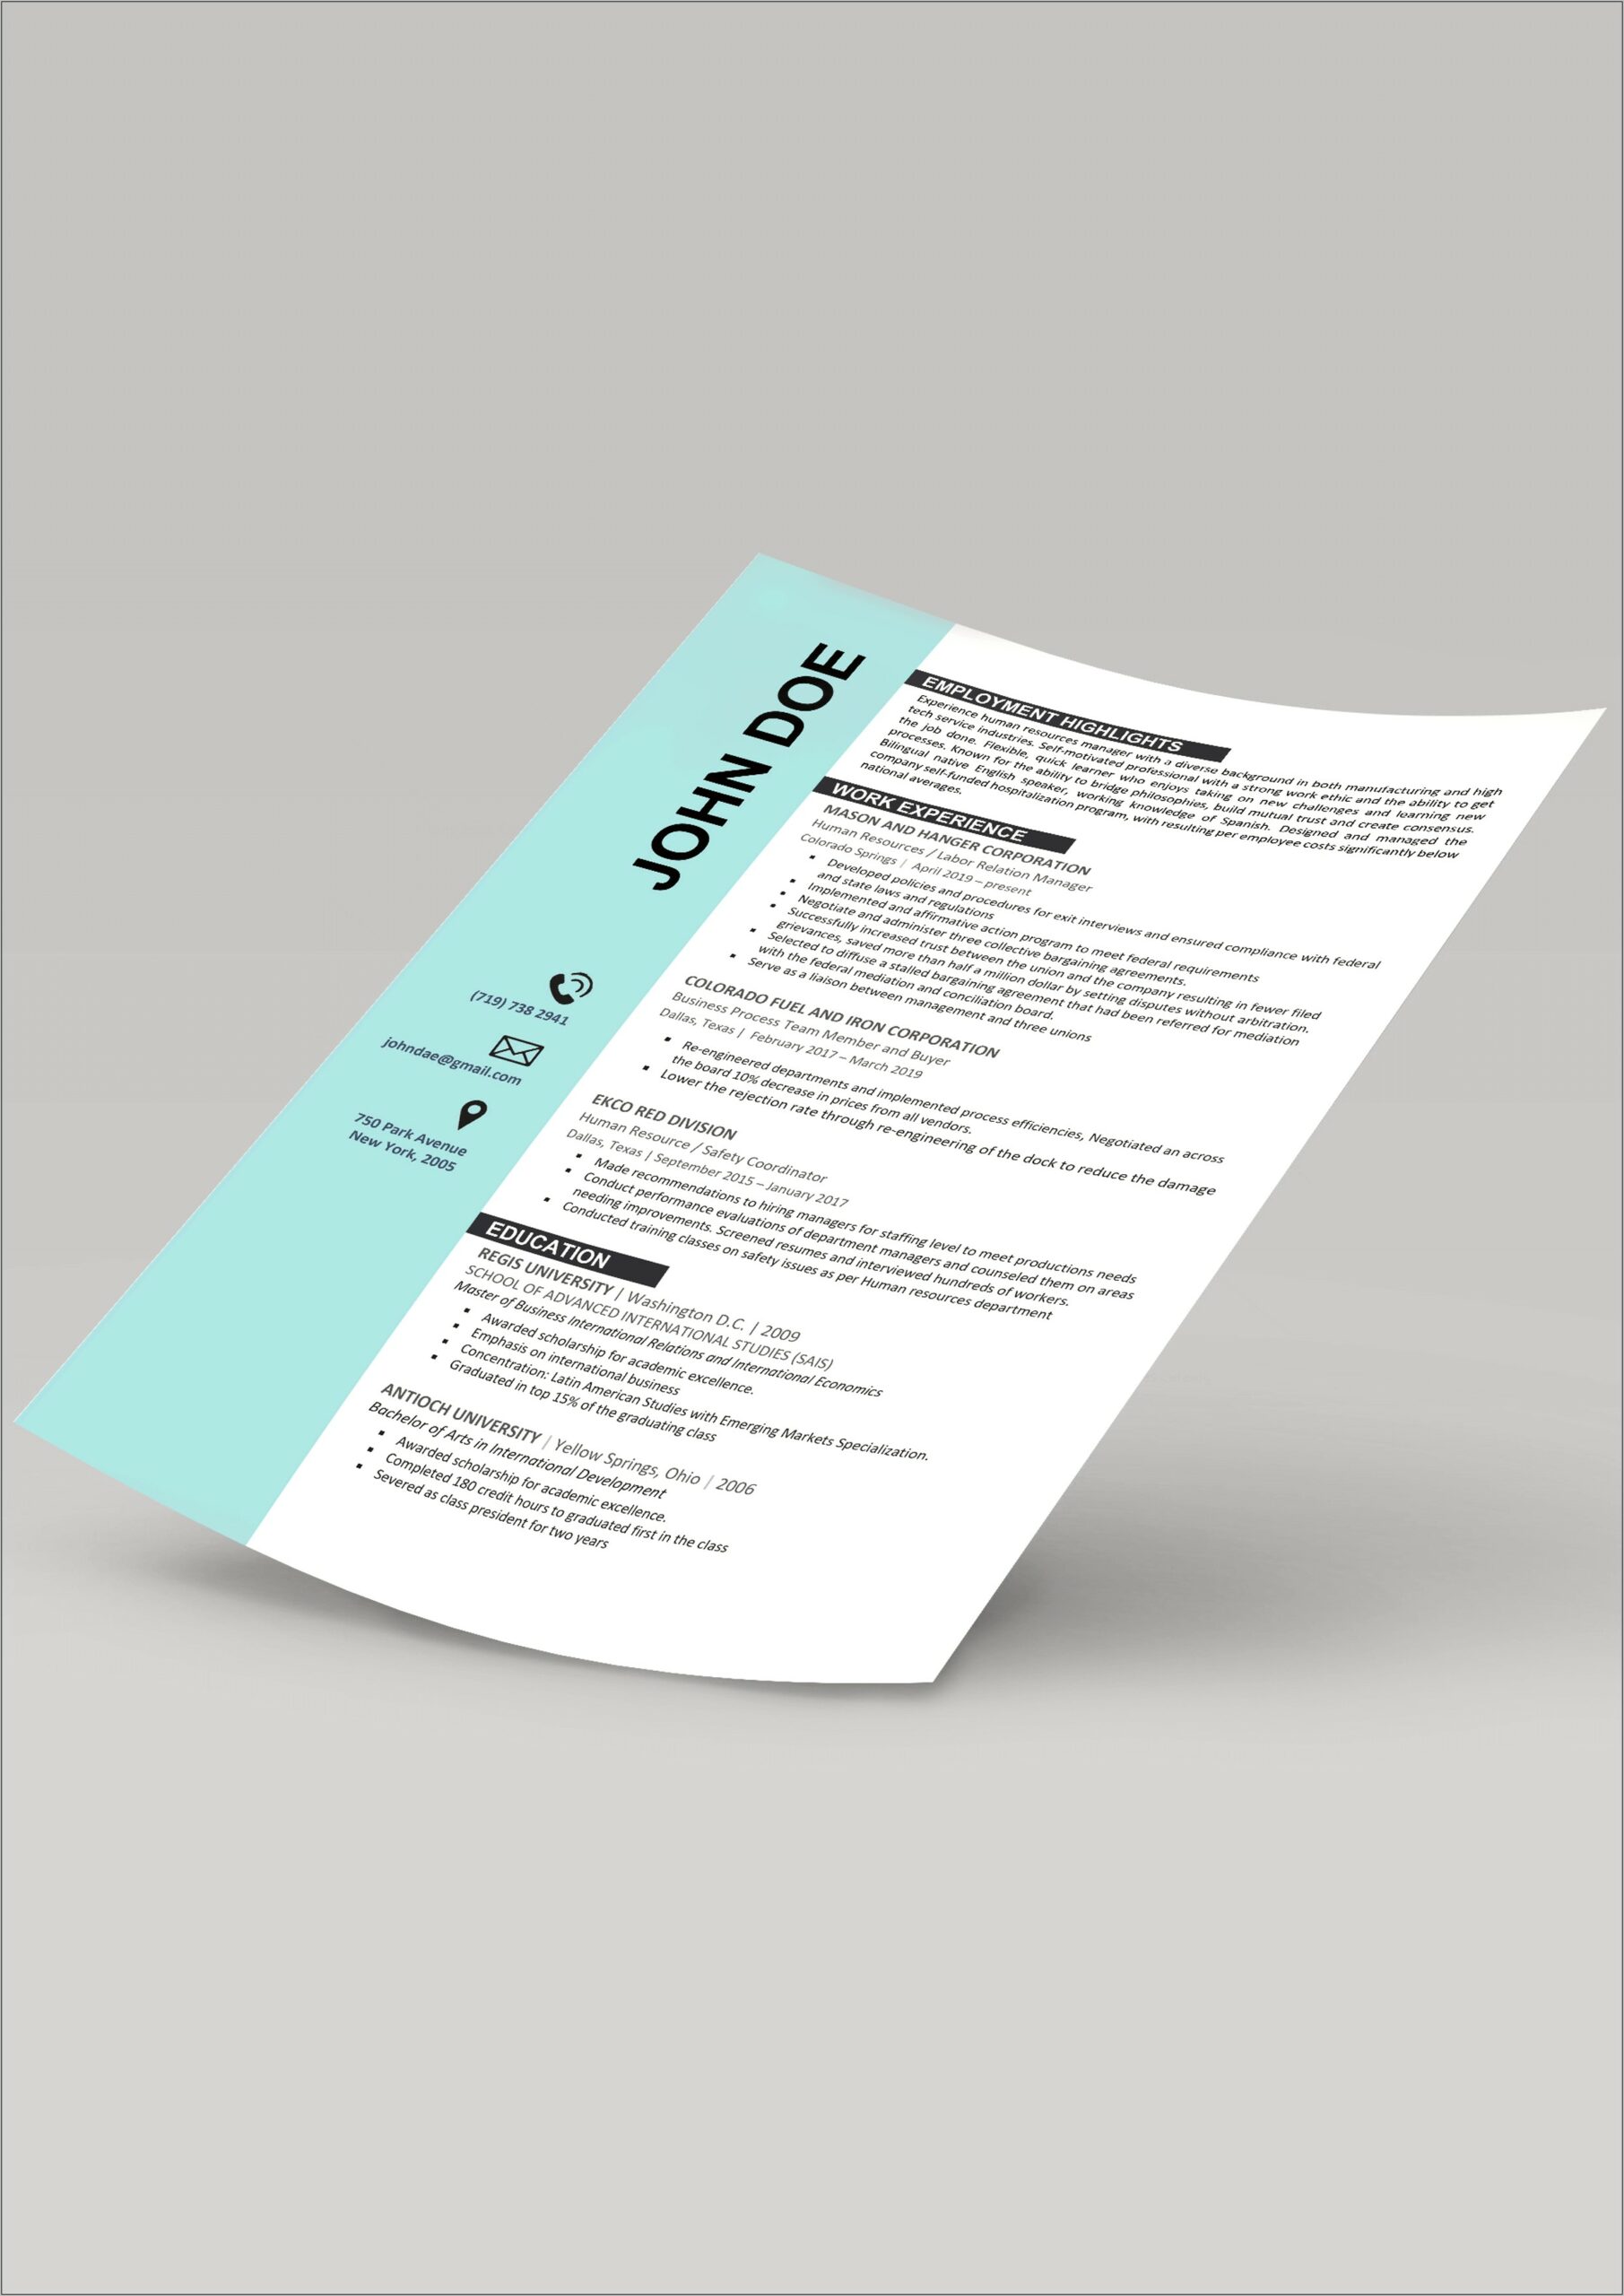 Project Manager Top Class Resume Samples 2019